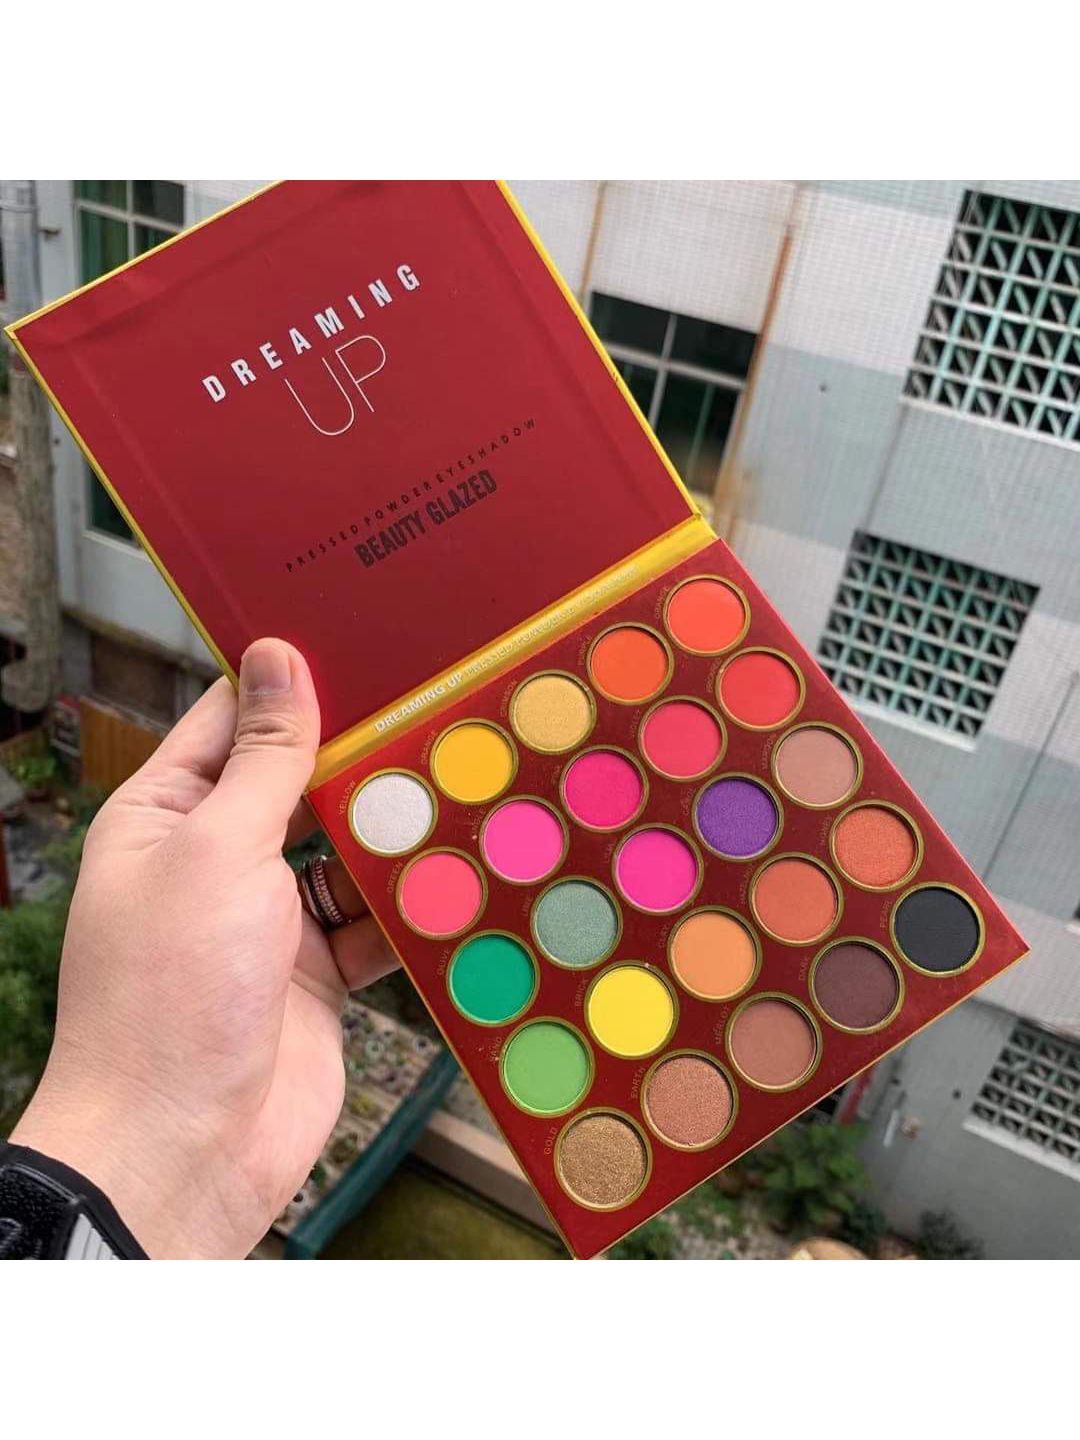 BEAUTY GLAZED Dreaming UP 25 Color Eyeshadow Palette - B87-B Price in India